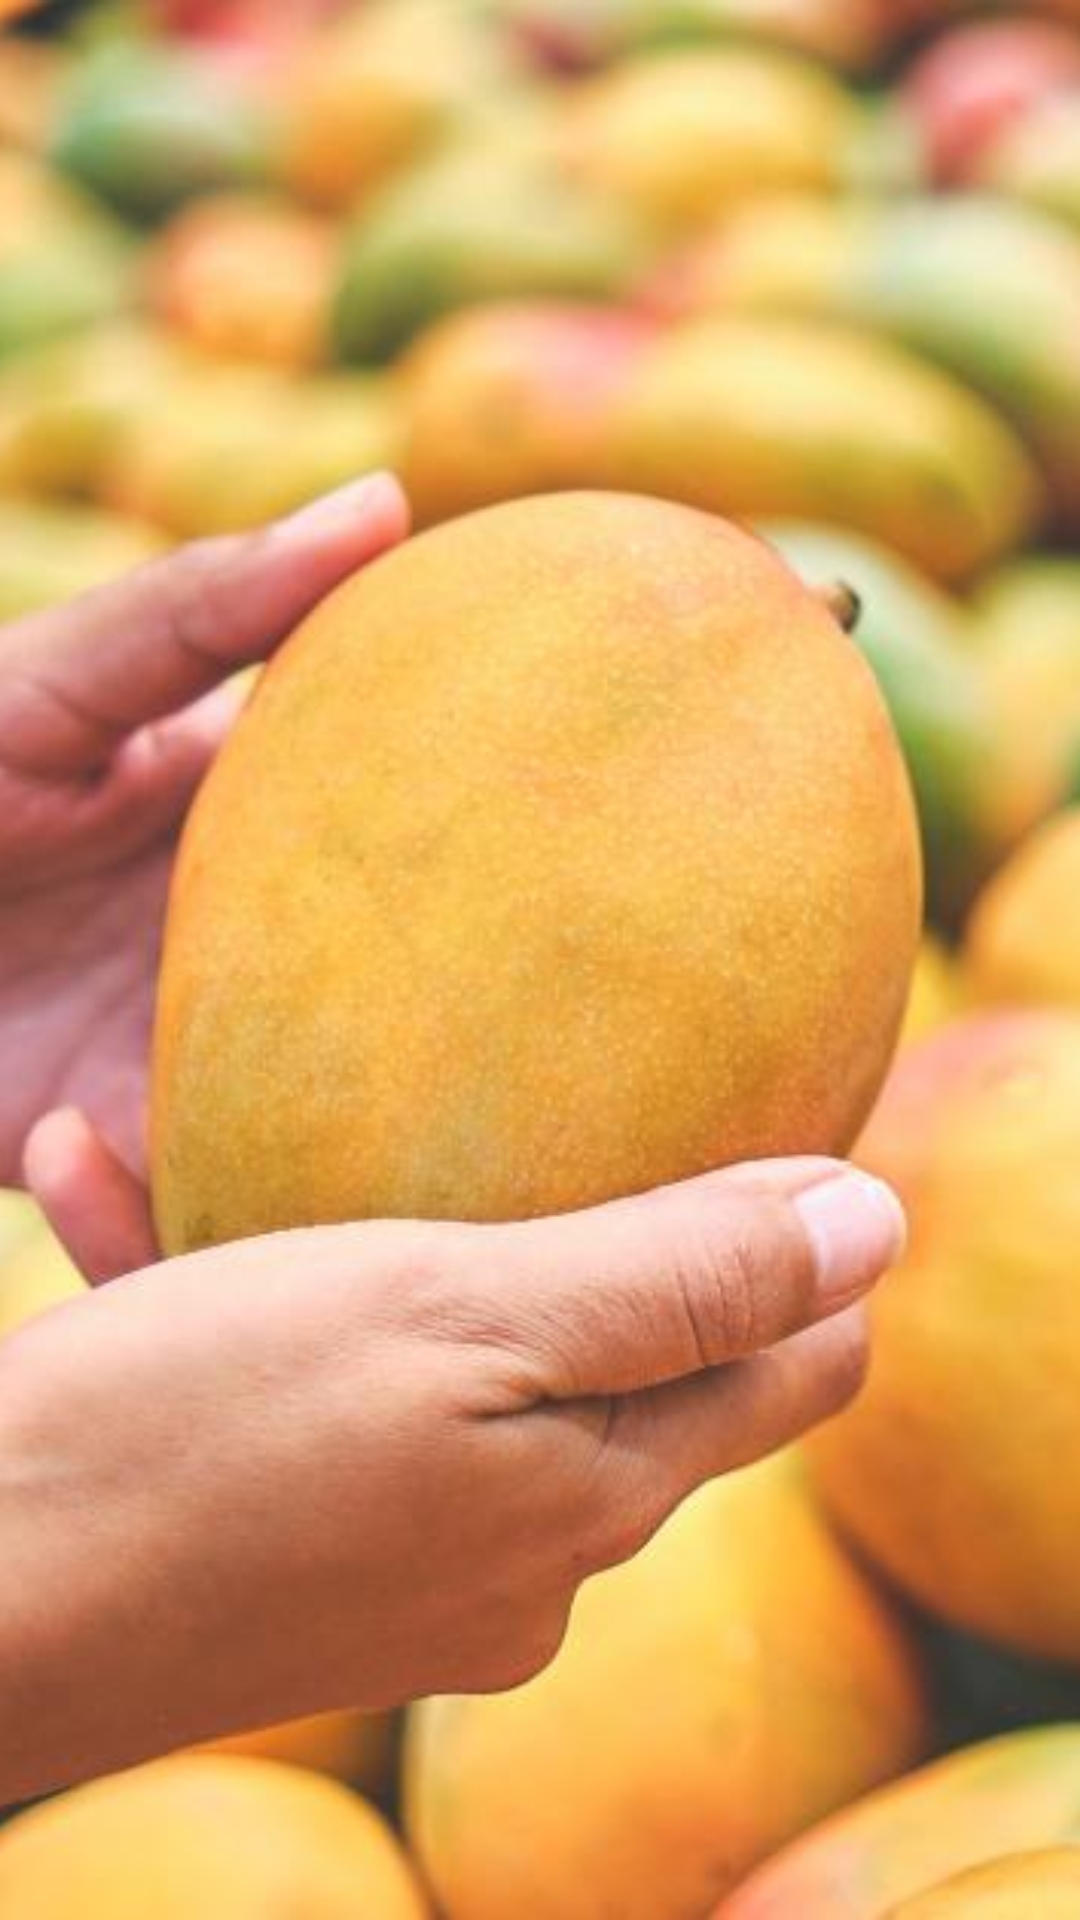 Top varieties of mango to try this summer